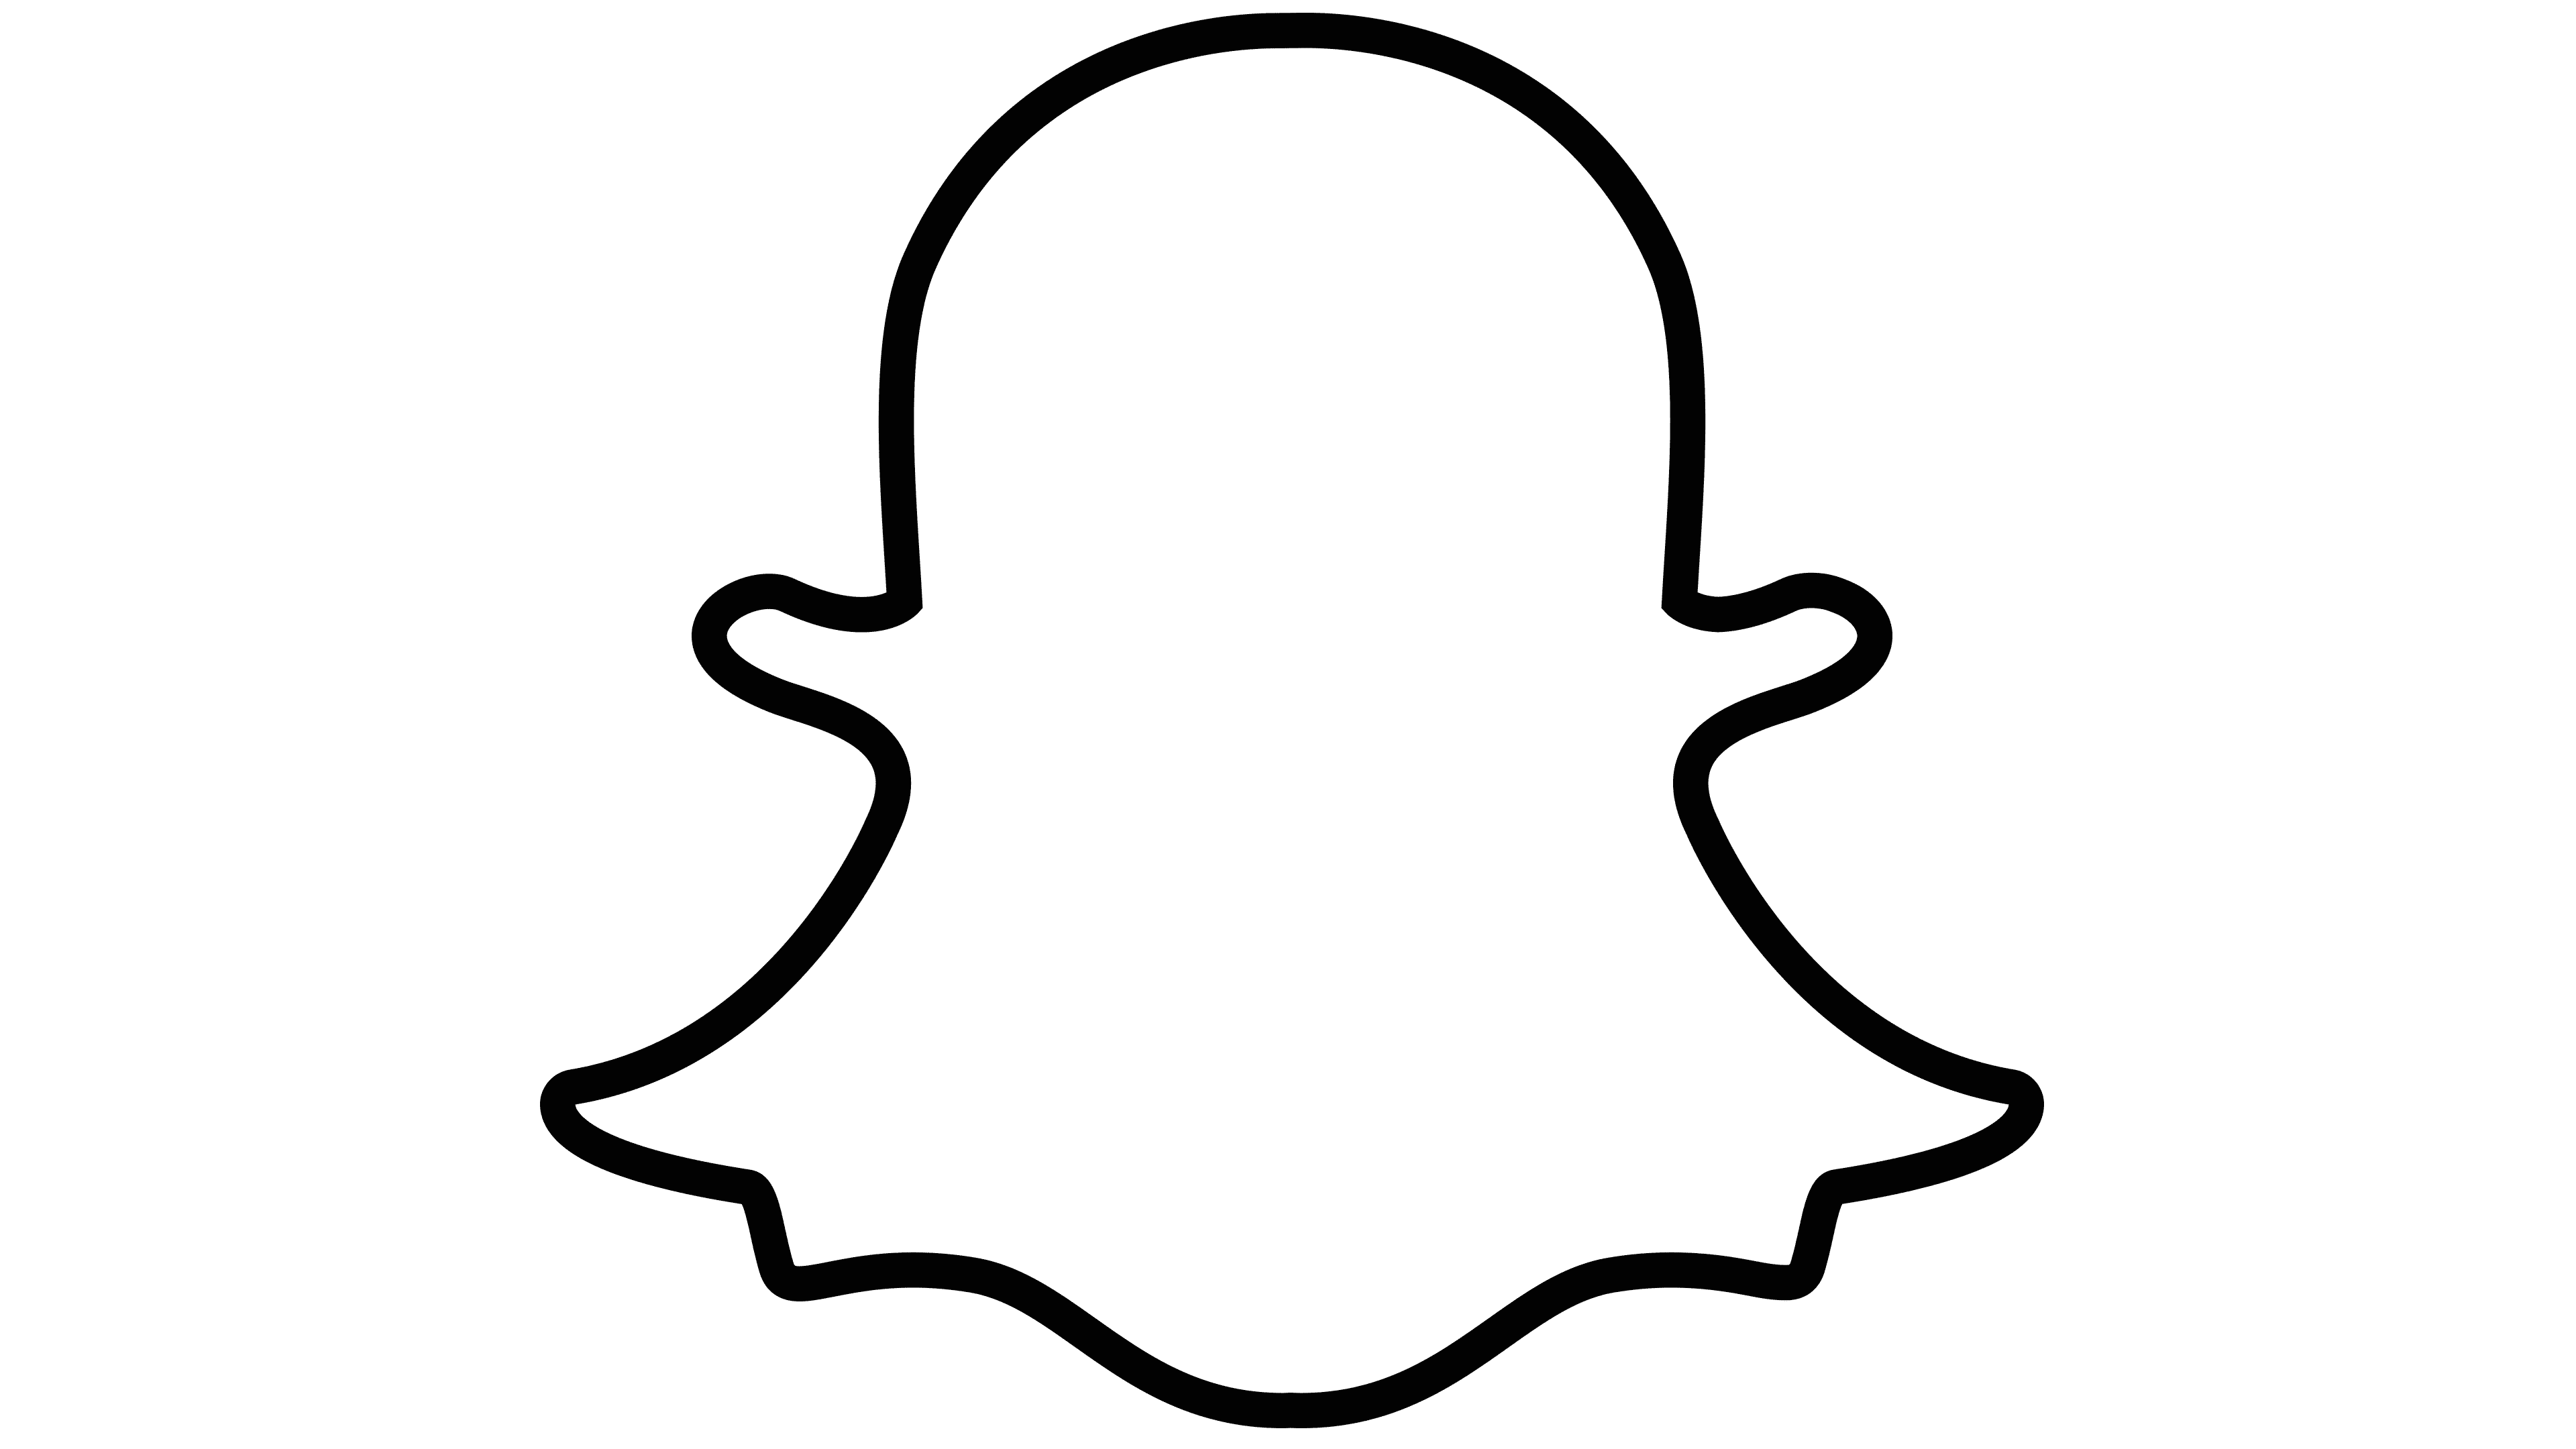 Instagramm Clipart Snapchat - Snapchat Logo Png Transparent Background -  Free Transparent PNG Clipart Images Download